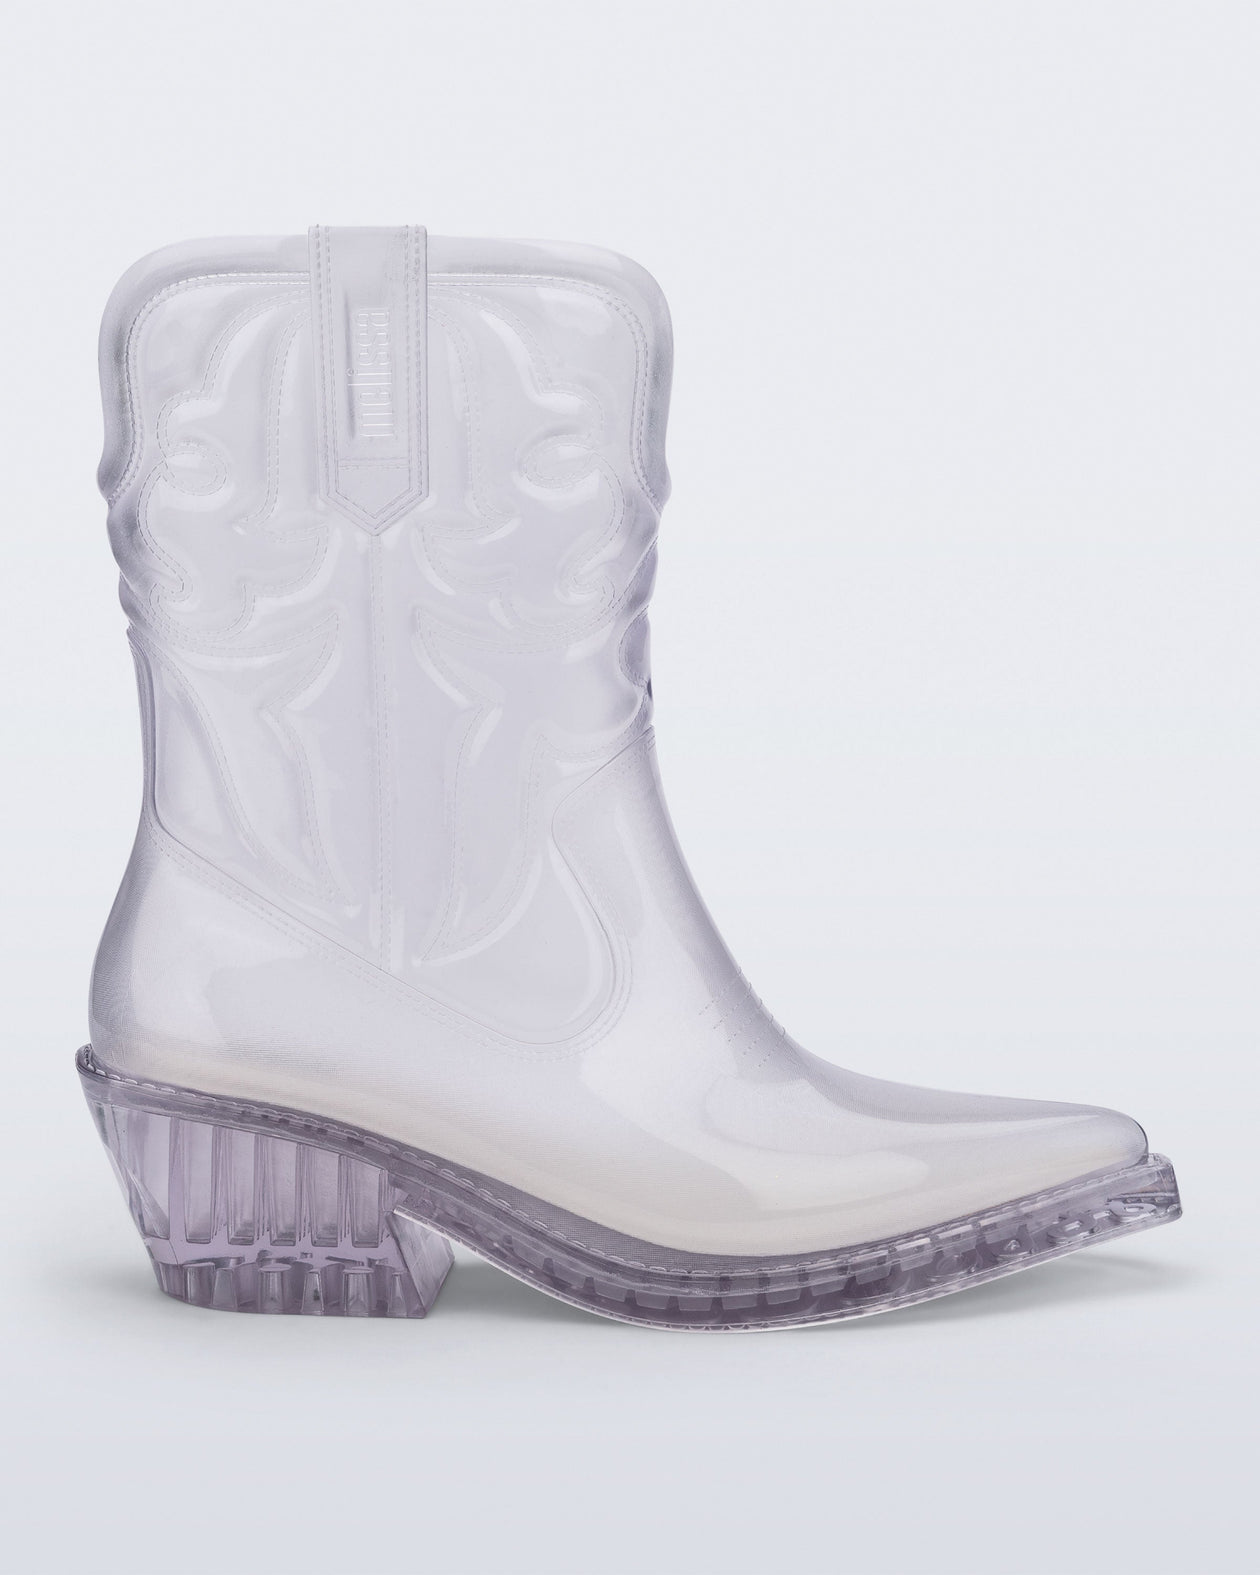 Side view of a clear Texas boot with pointed toe.